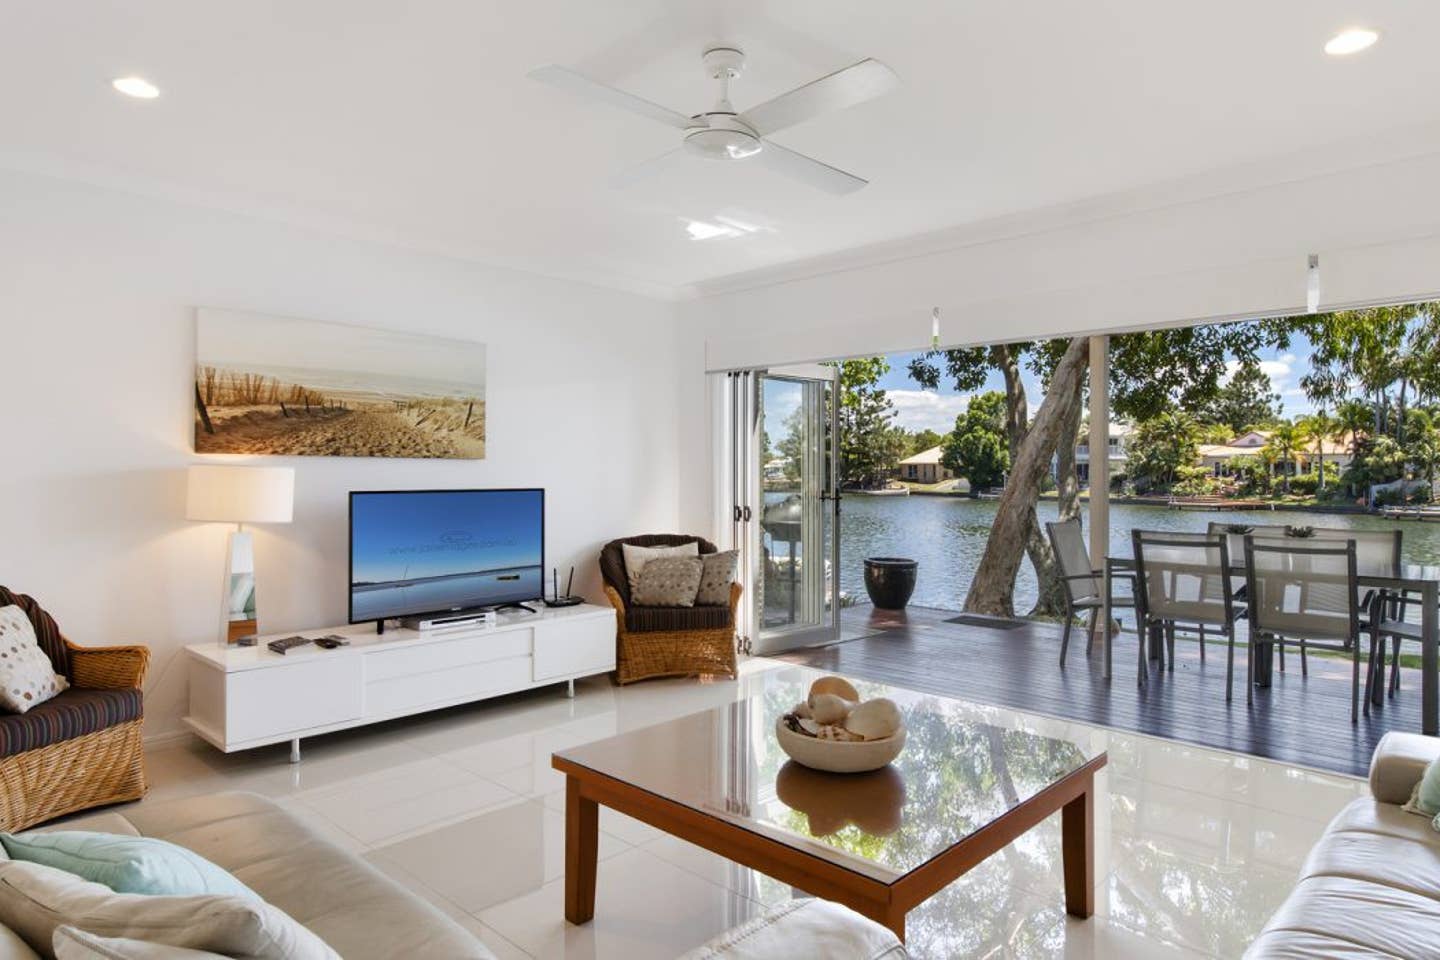 A stylish house in Noosa waters